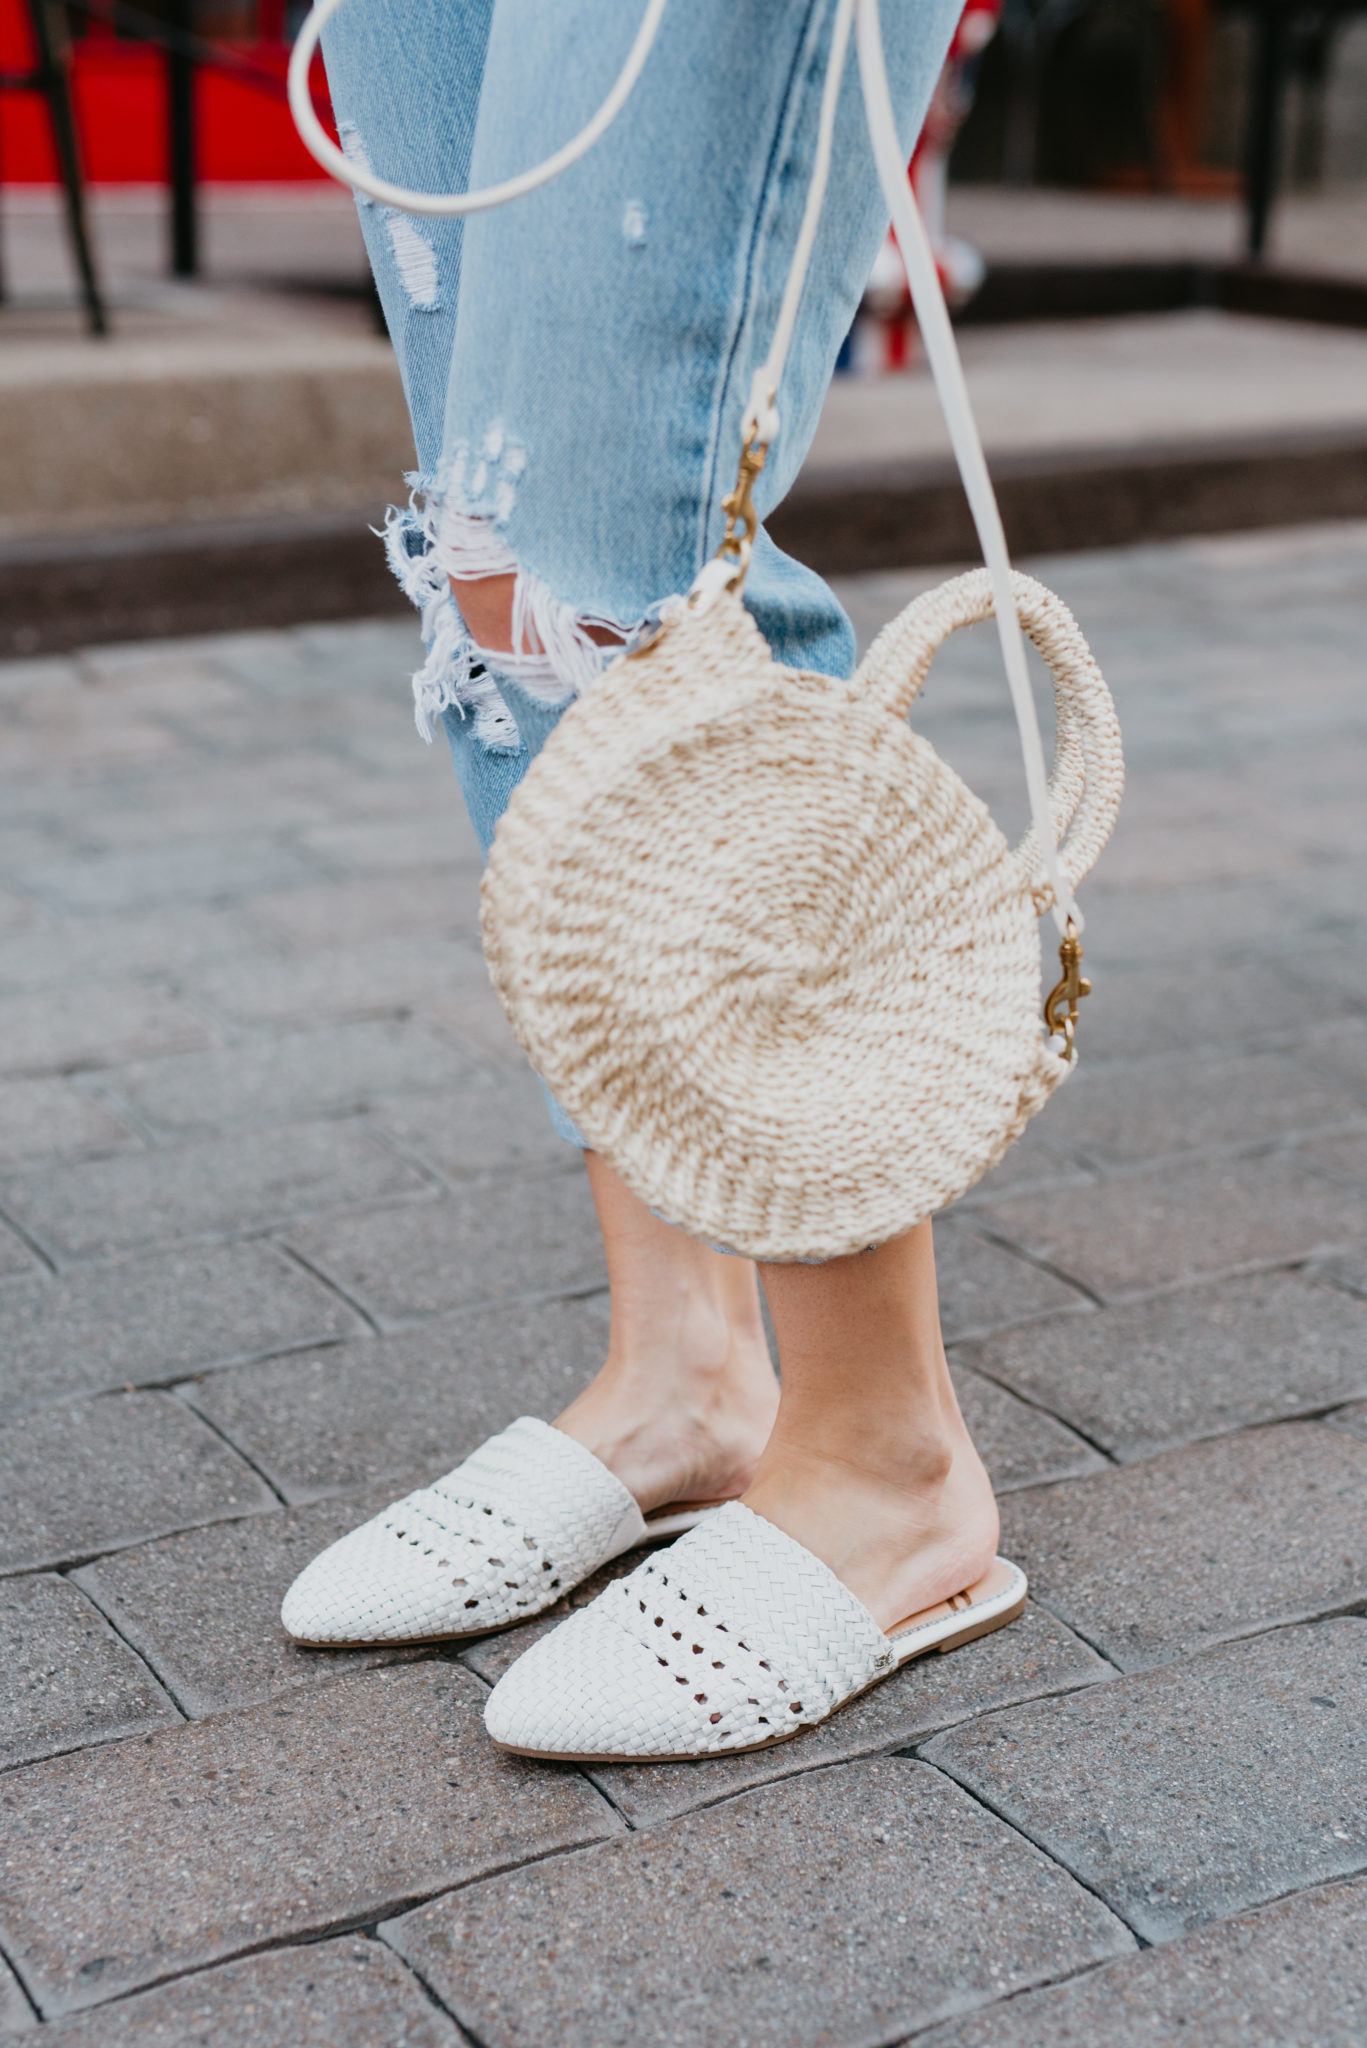 Shopbop Sale favorites featured by top US fashion blog, Outfits & Outings: image of a woman wearing Sam Edelman woven mules available at ShopBop